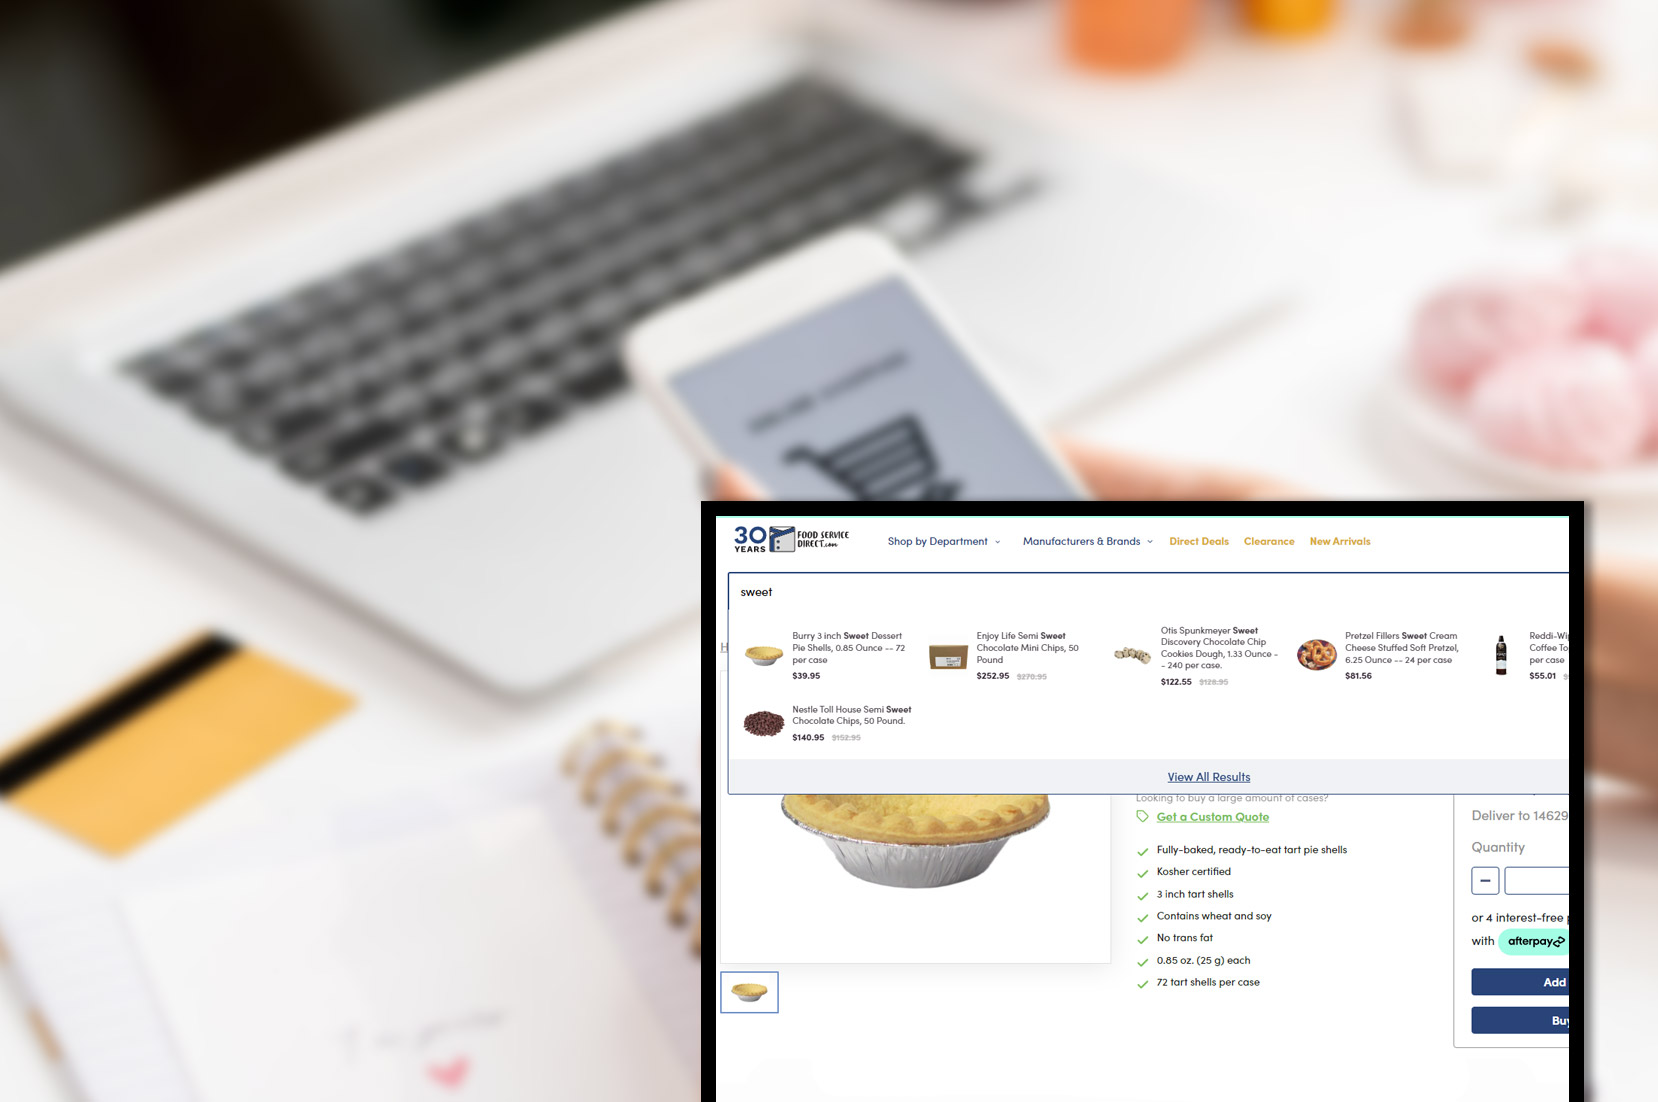 foodservicedirect-comproduct-categories-keywords-and-brand-scraping-services